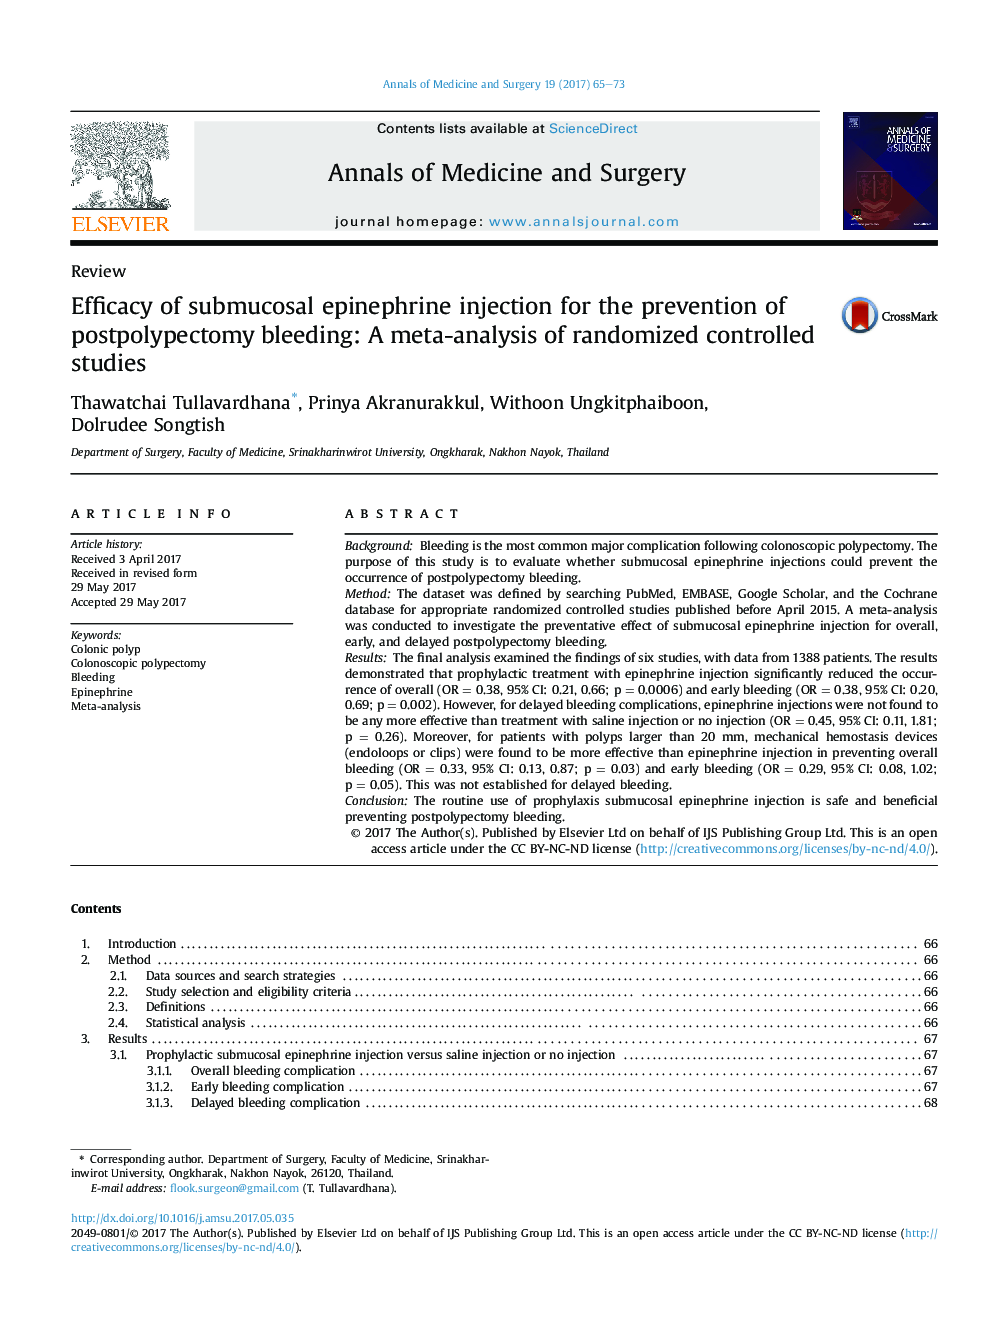 ReviewEfficacy of submucosal epinephrine injection for the prevention of postpolypectomy bleeding: A meta-analysis of randomized controlled studies